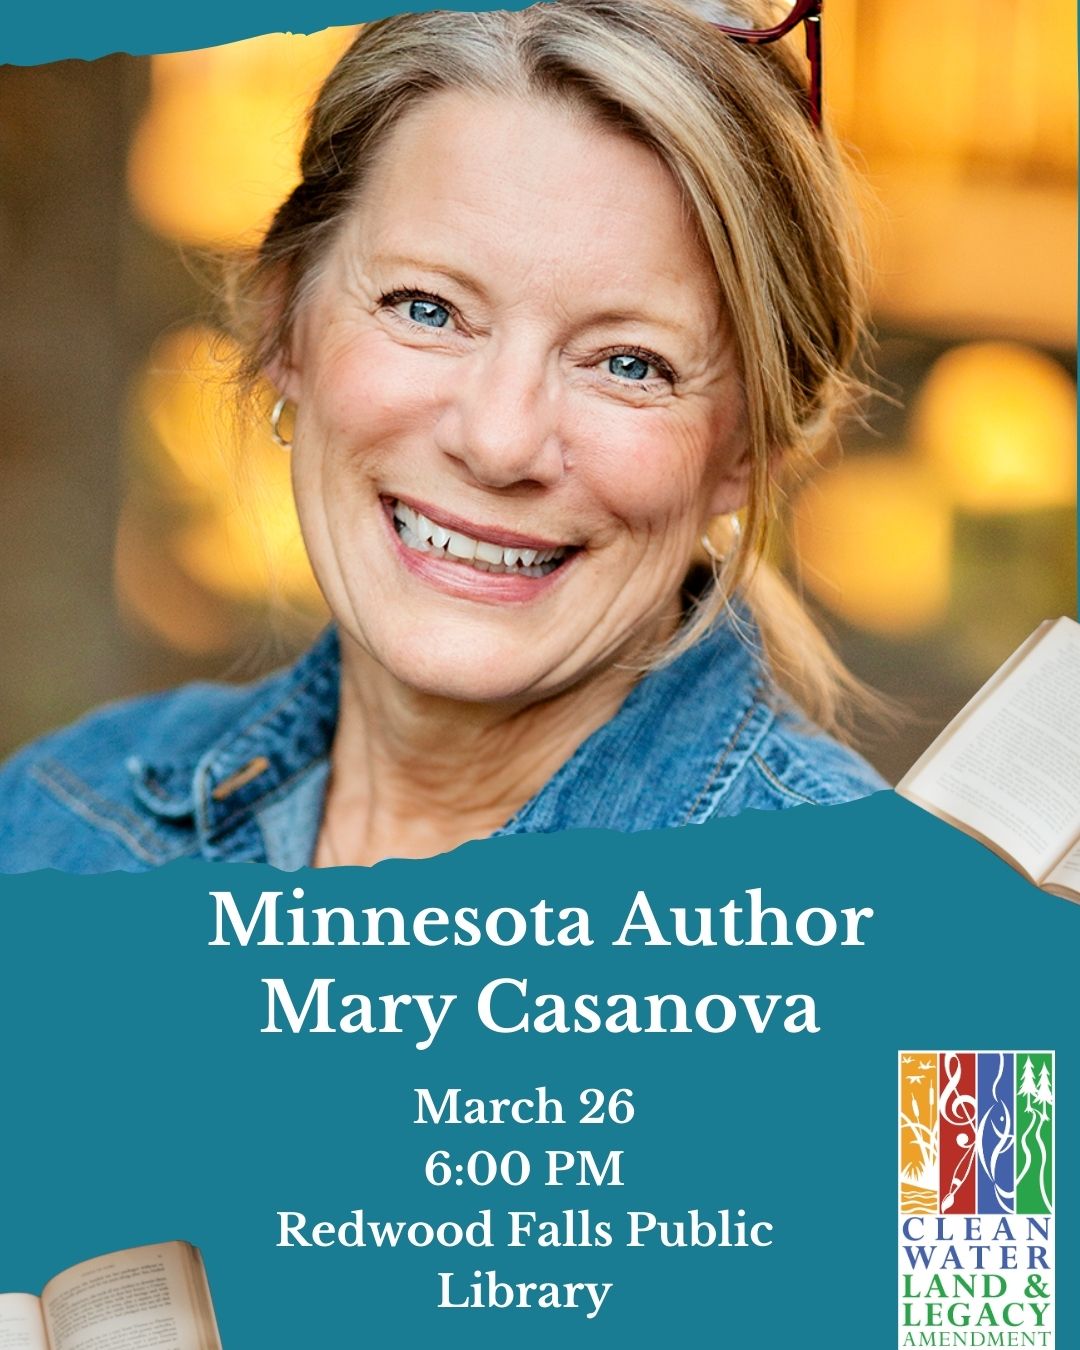 <h1 class="tribe-events-single-event-title">Mary Casanova Author Visit</h1>